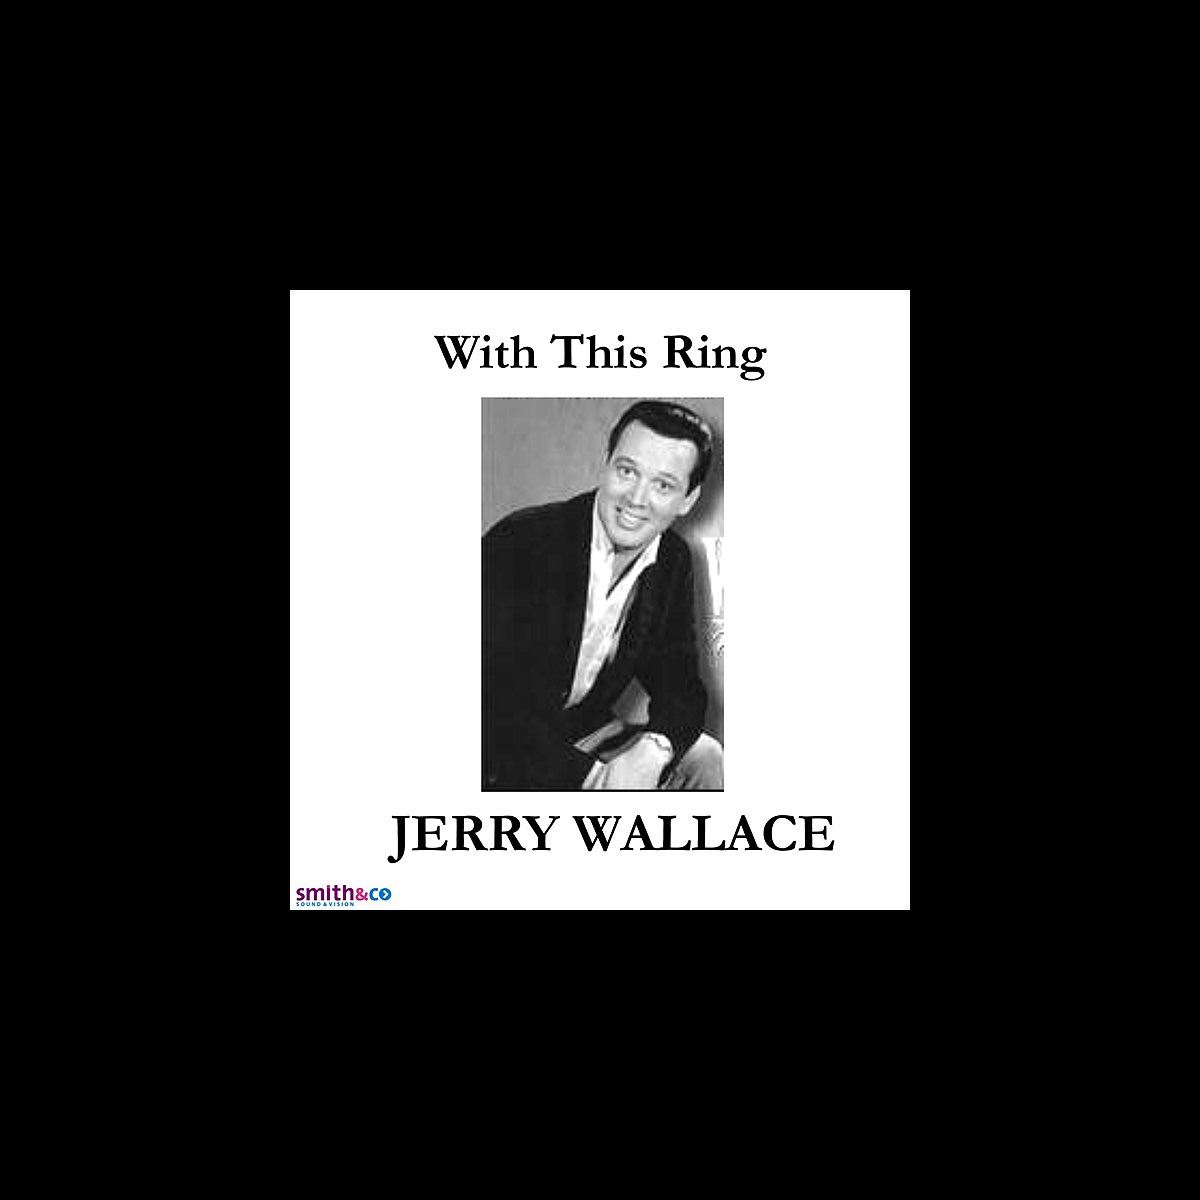 With This Ring by Jerry Wallace on Apple Music